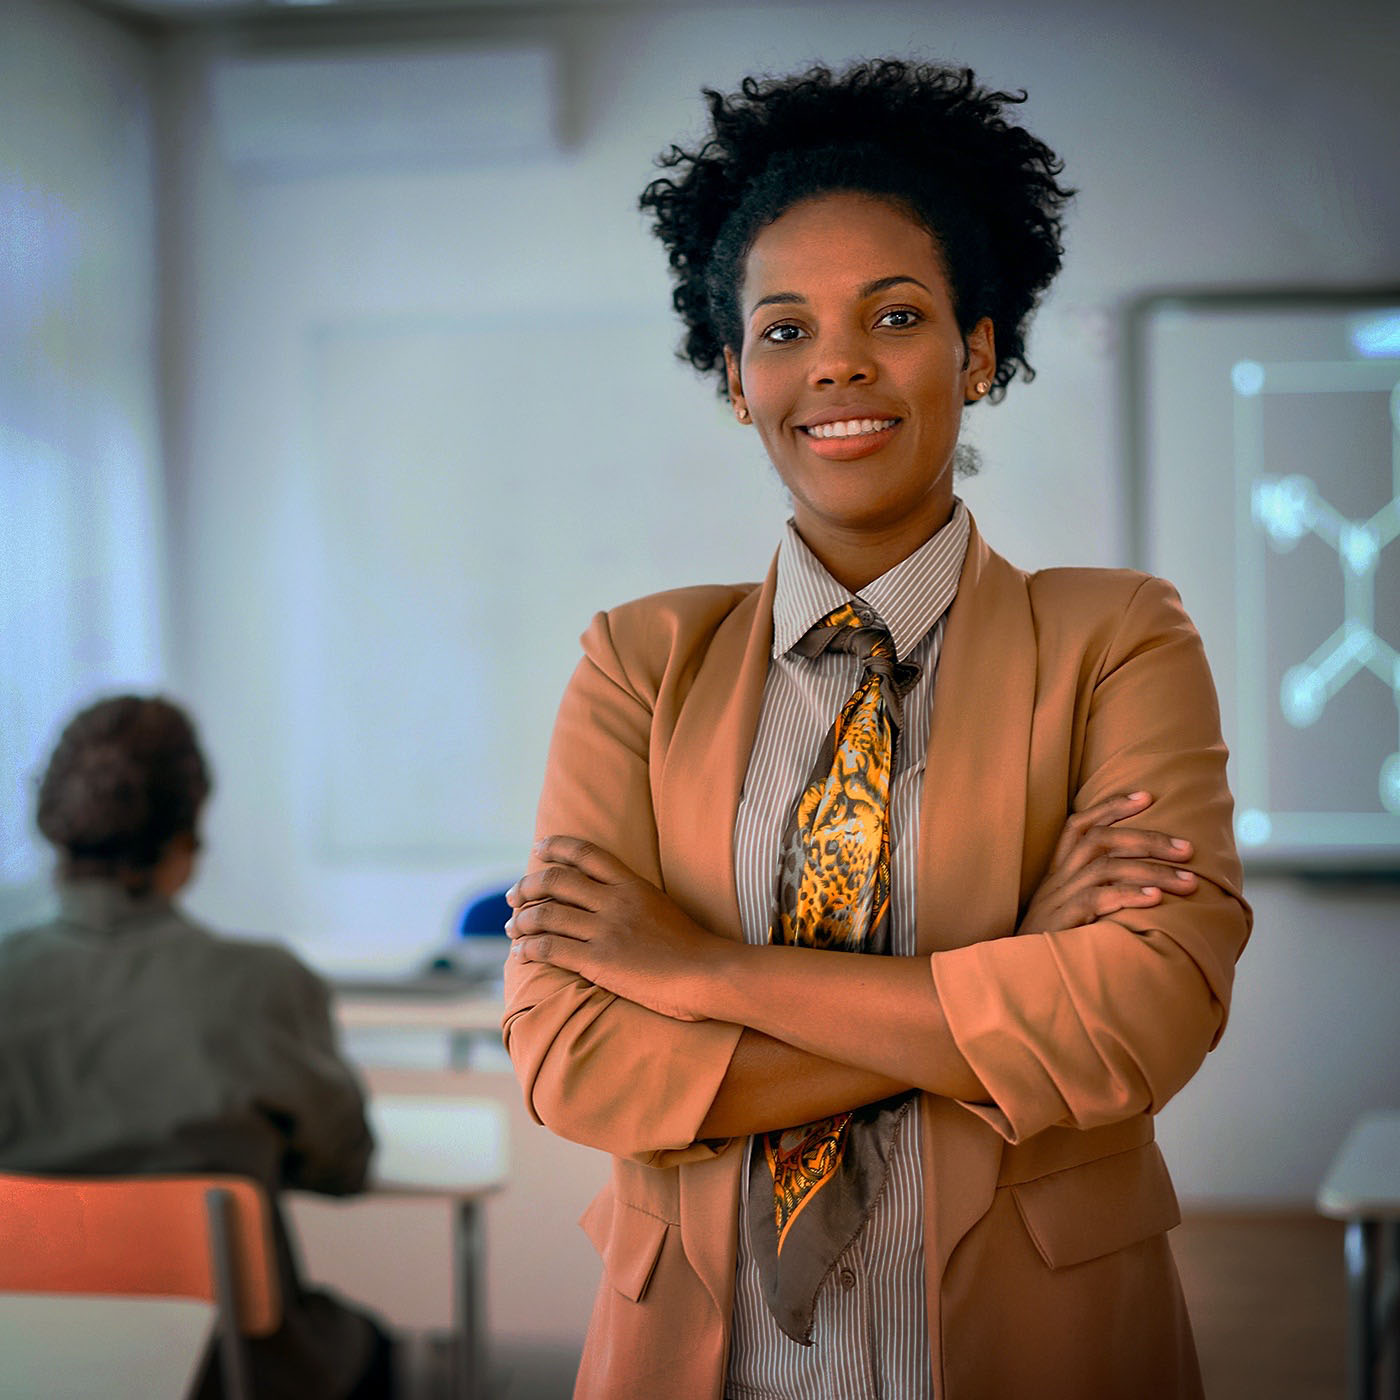 Portrait of happy confident African American teacher in classroom looks at camera.